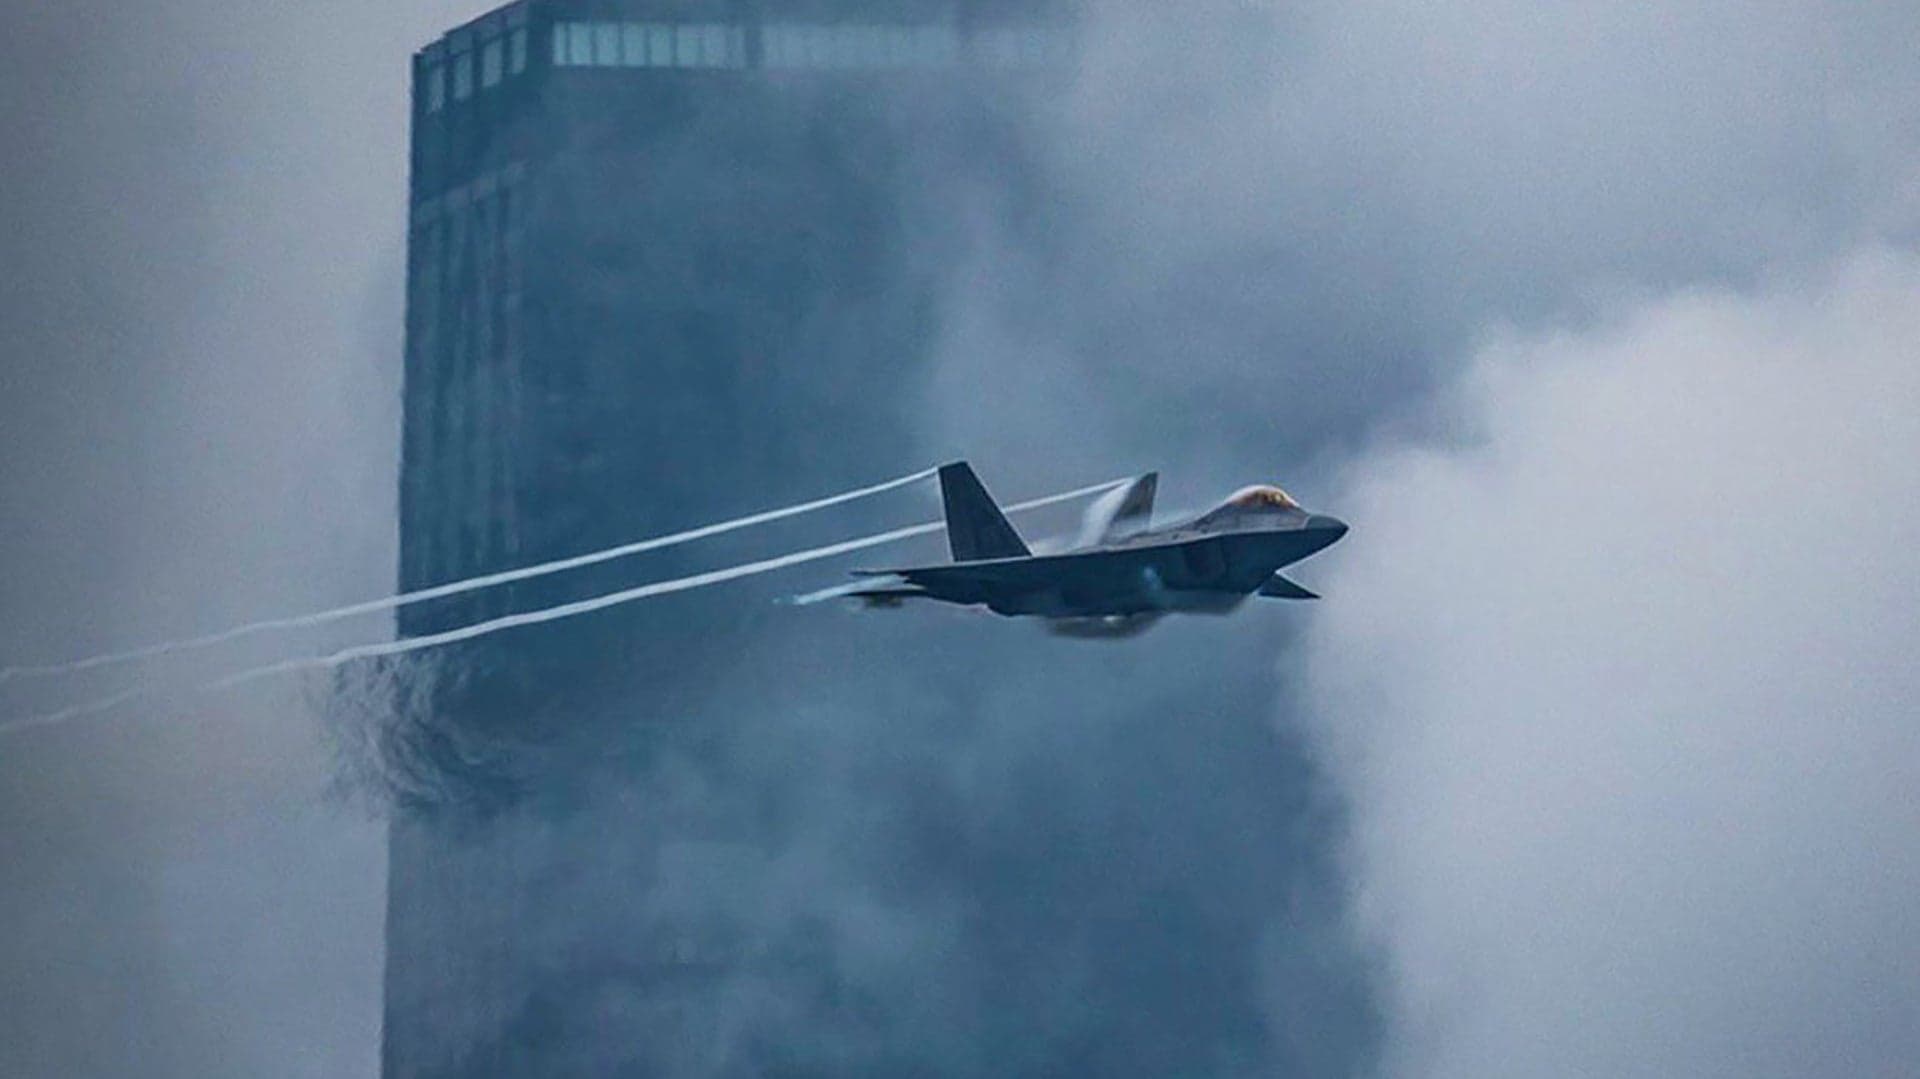 You Have To See The Rest Of This Shot Of An F-22 Tearing Across A Stormy Chicago Skyline